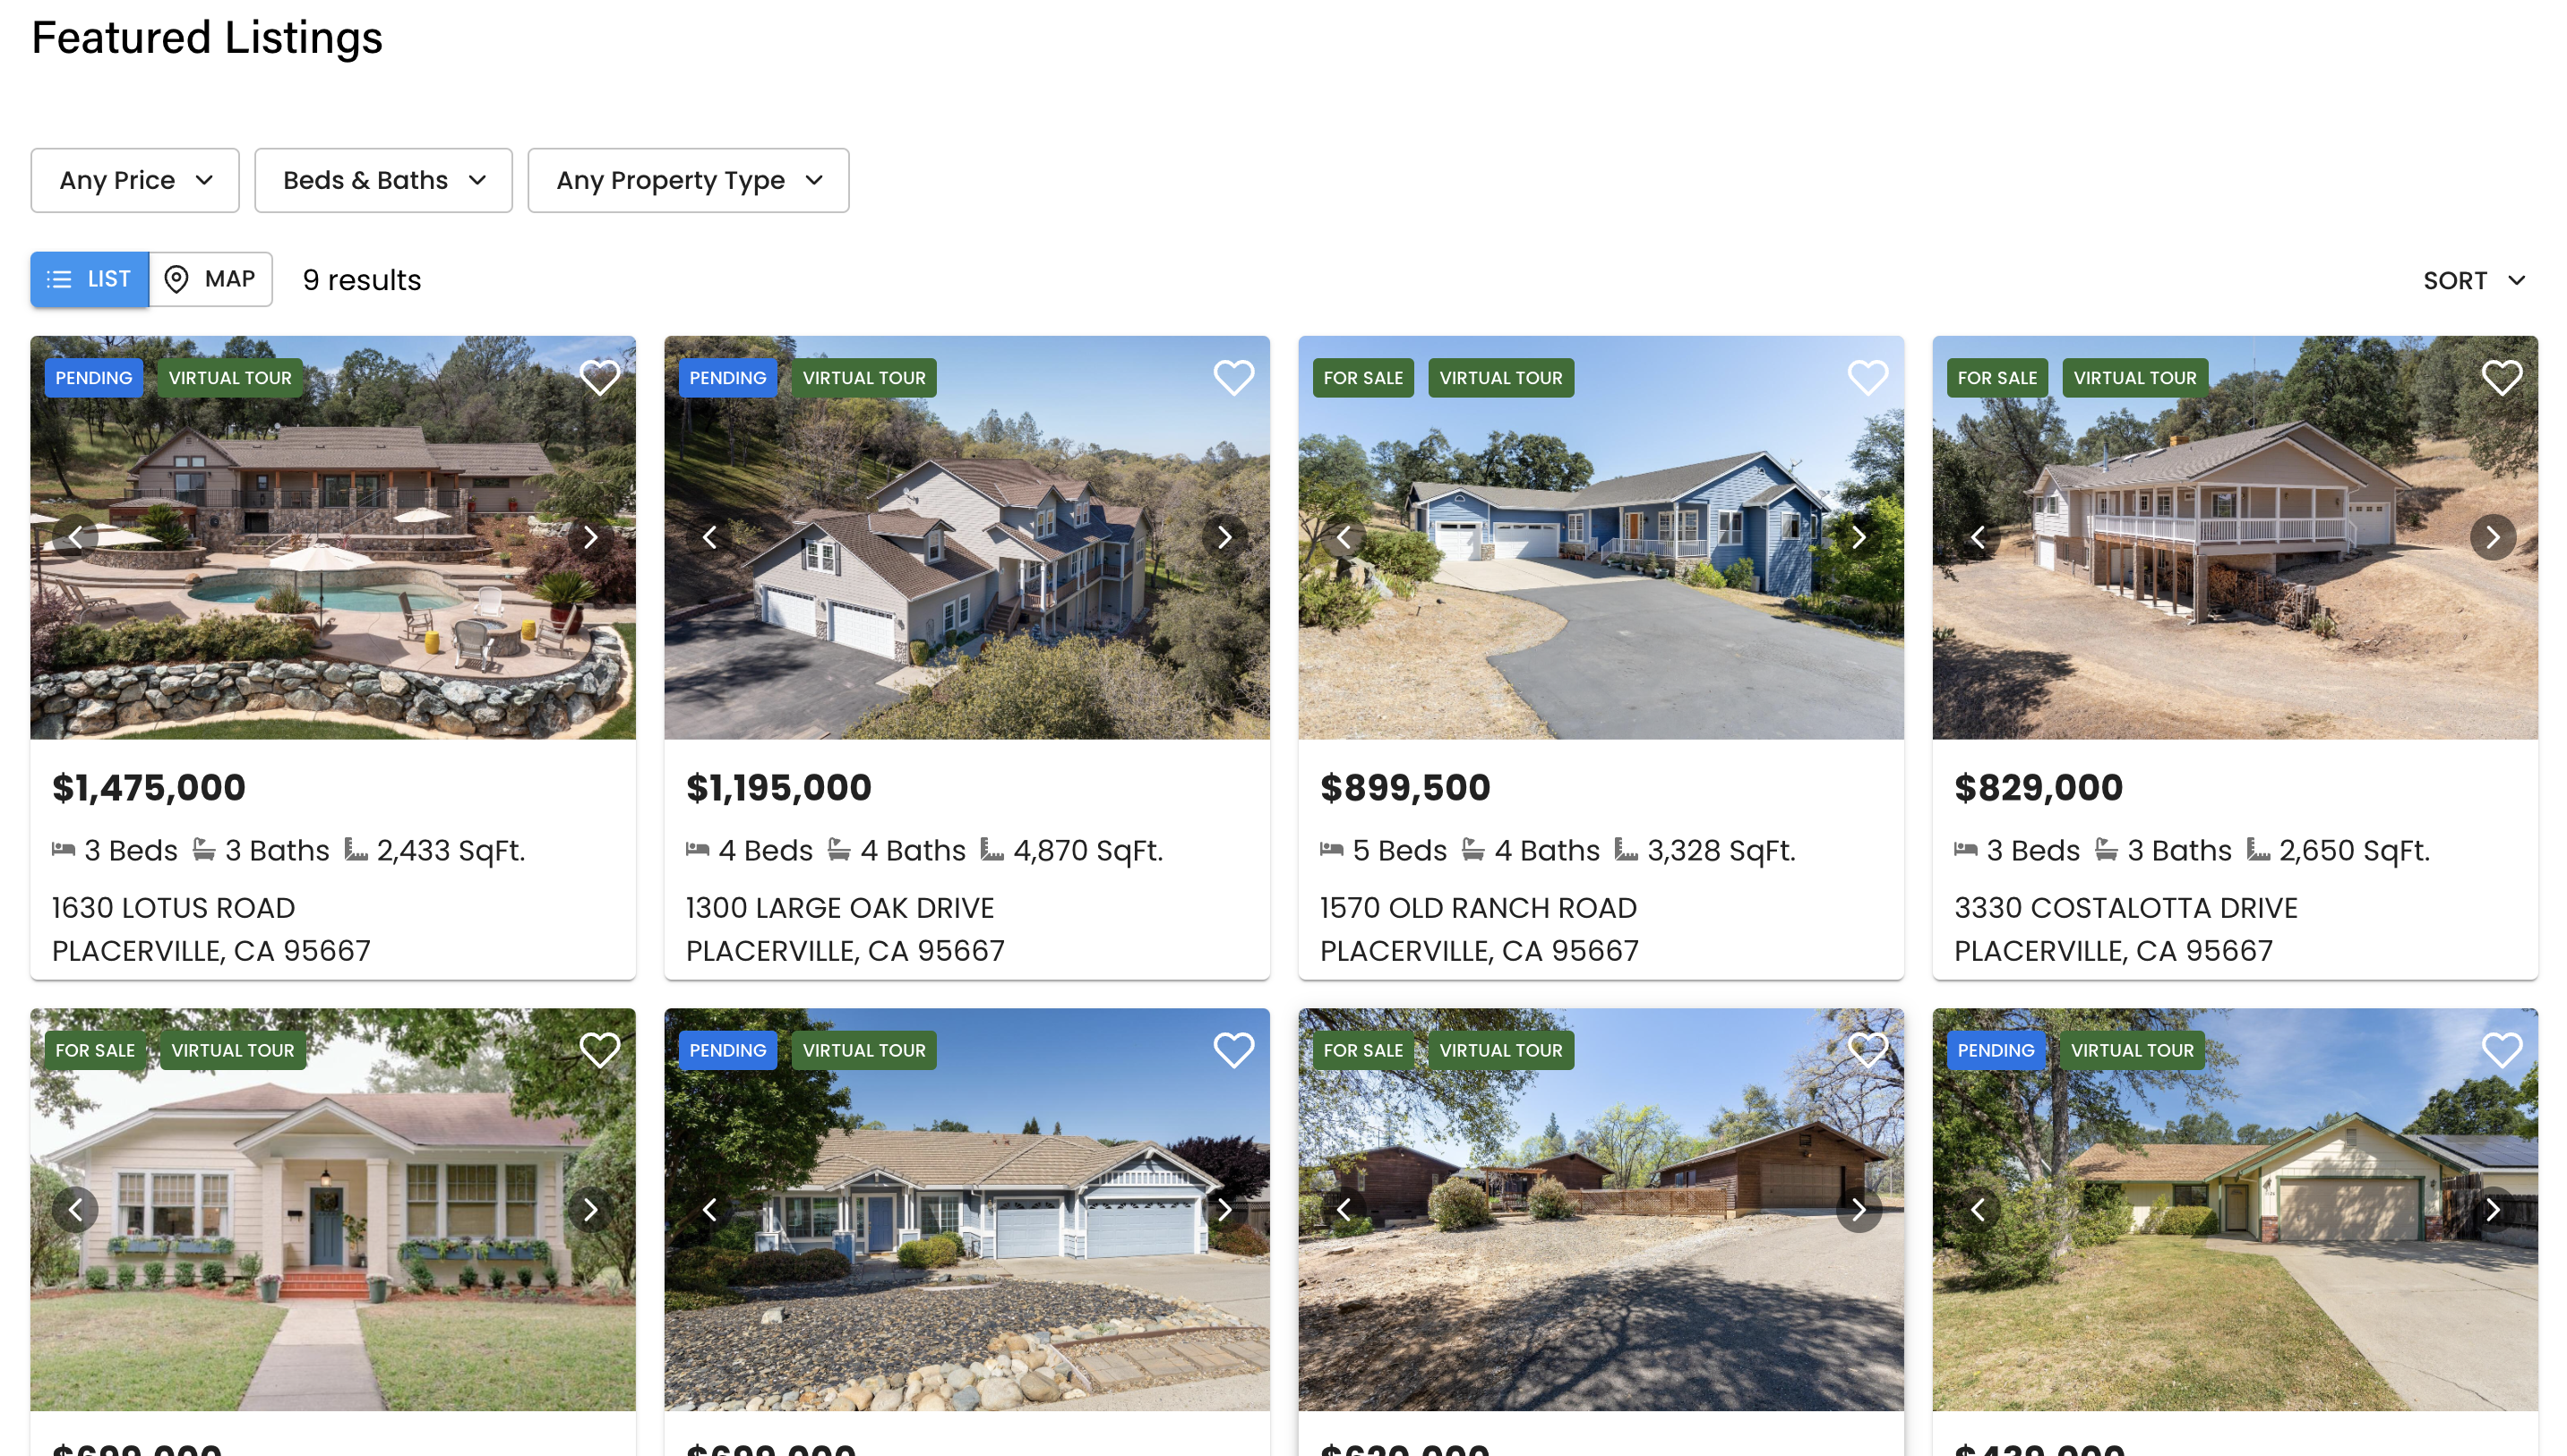 Featured listings gallery example